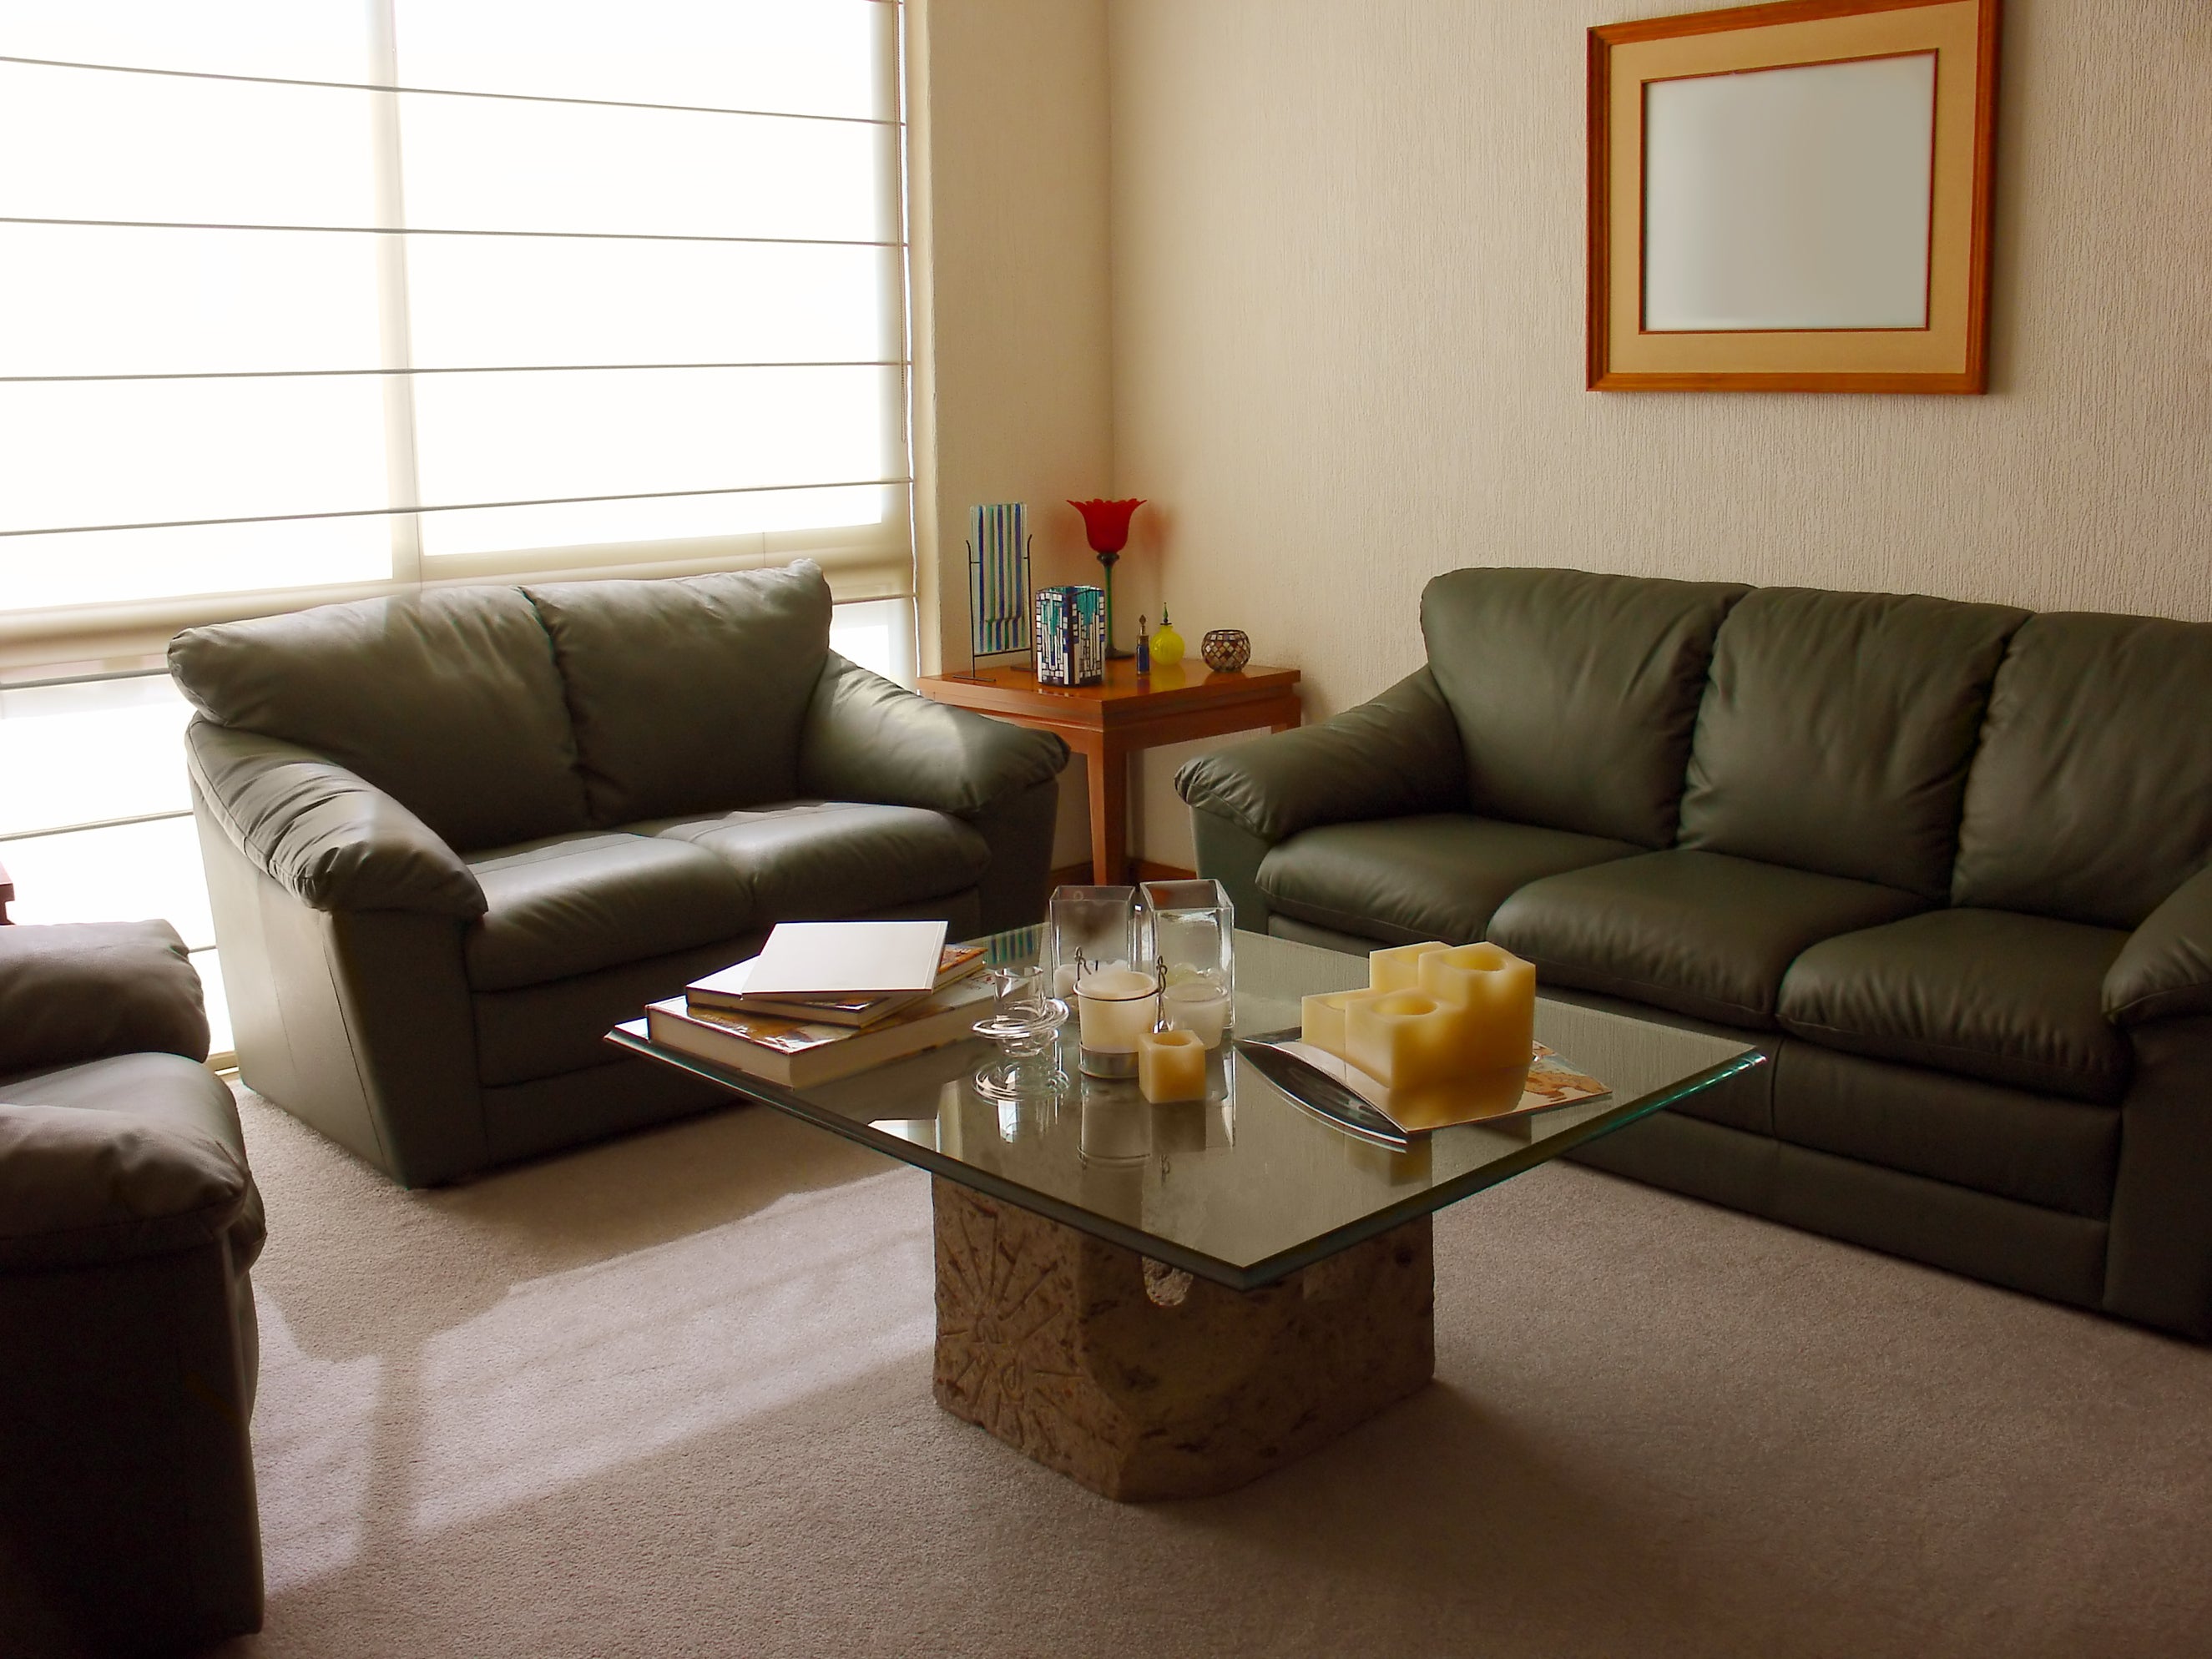 Square clear glass table placed between three pieces of dark leather couches with a tan stone base